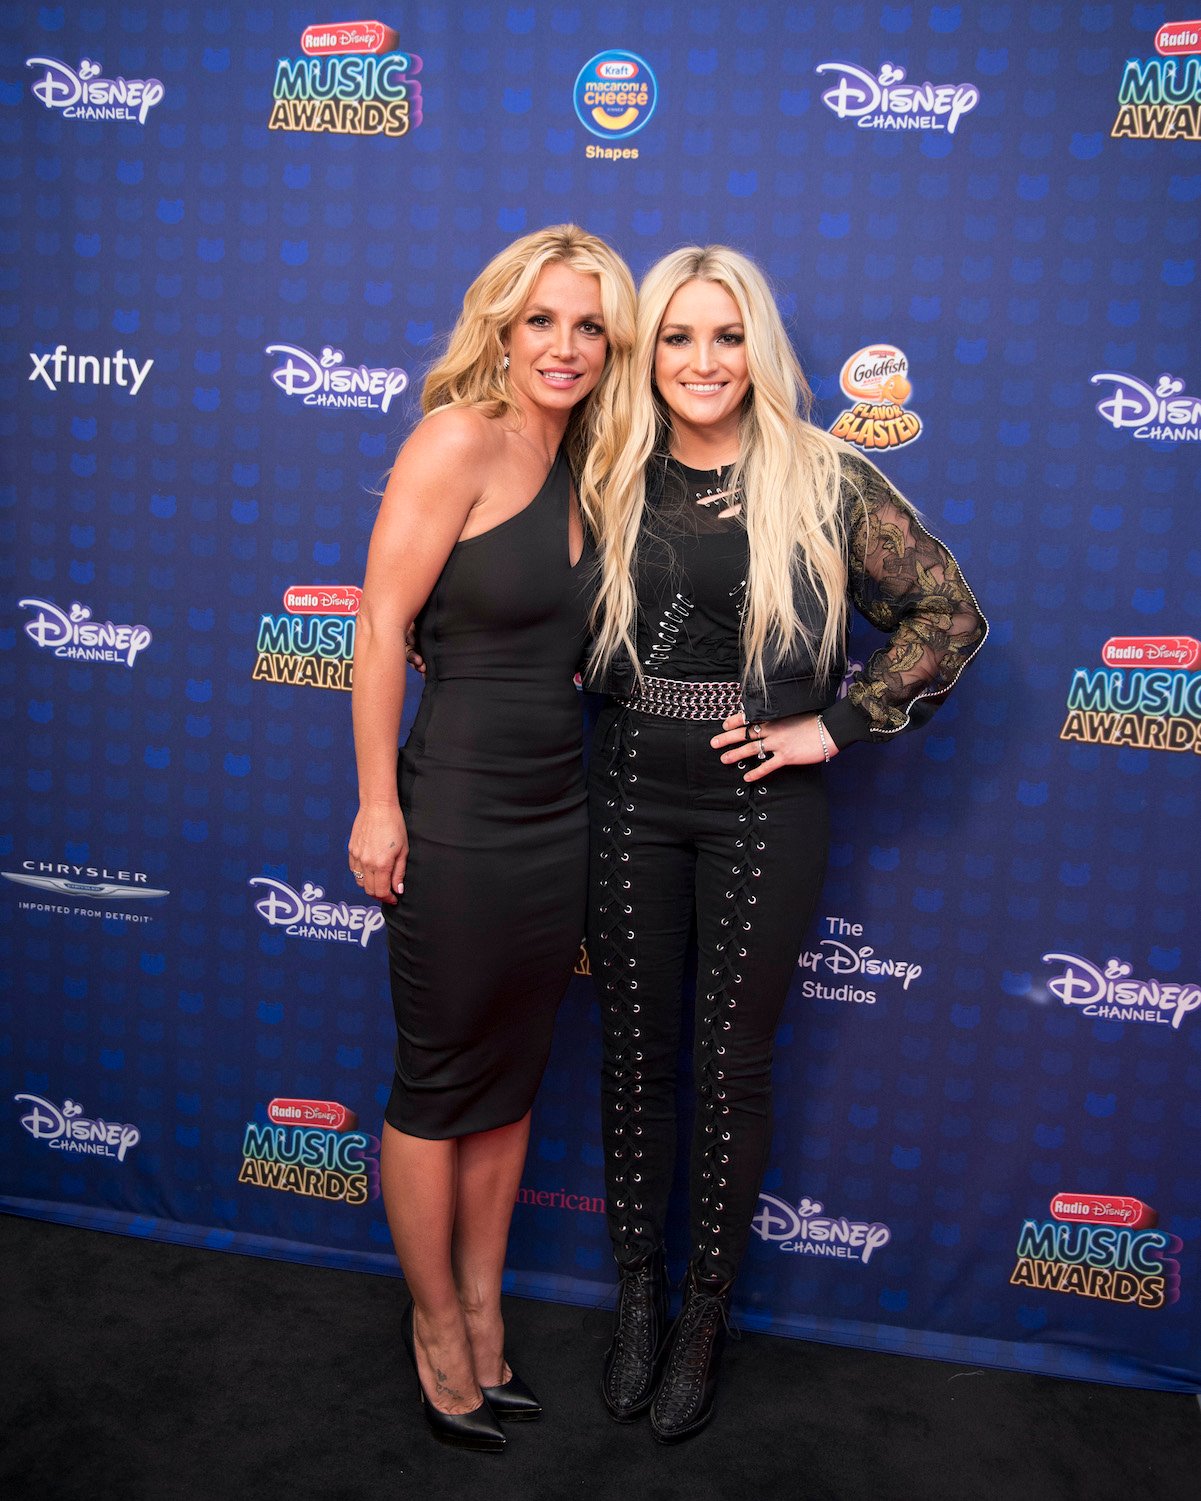 Britney Spears, left, with her sister, Jamie Lynn Spears, at the Radio Disney Music Awards in 2017